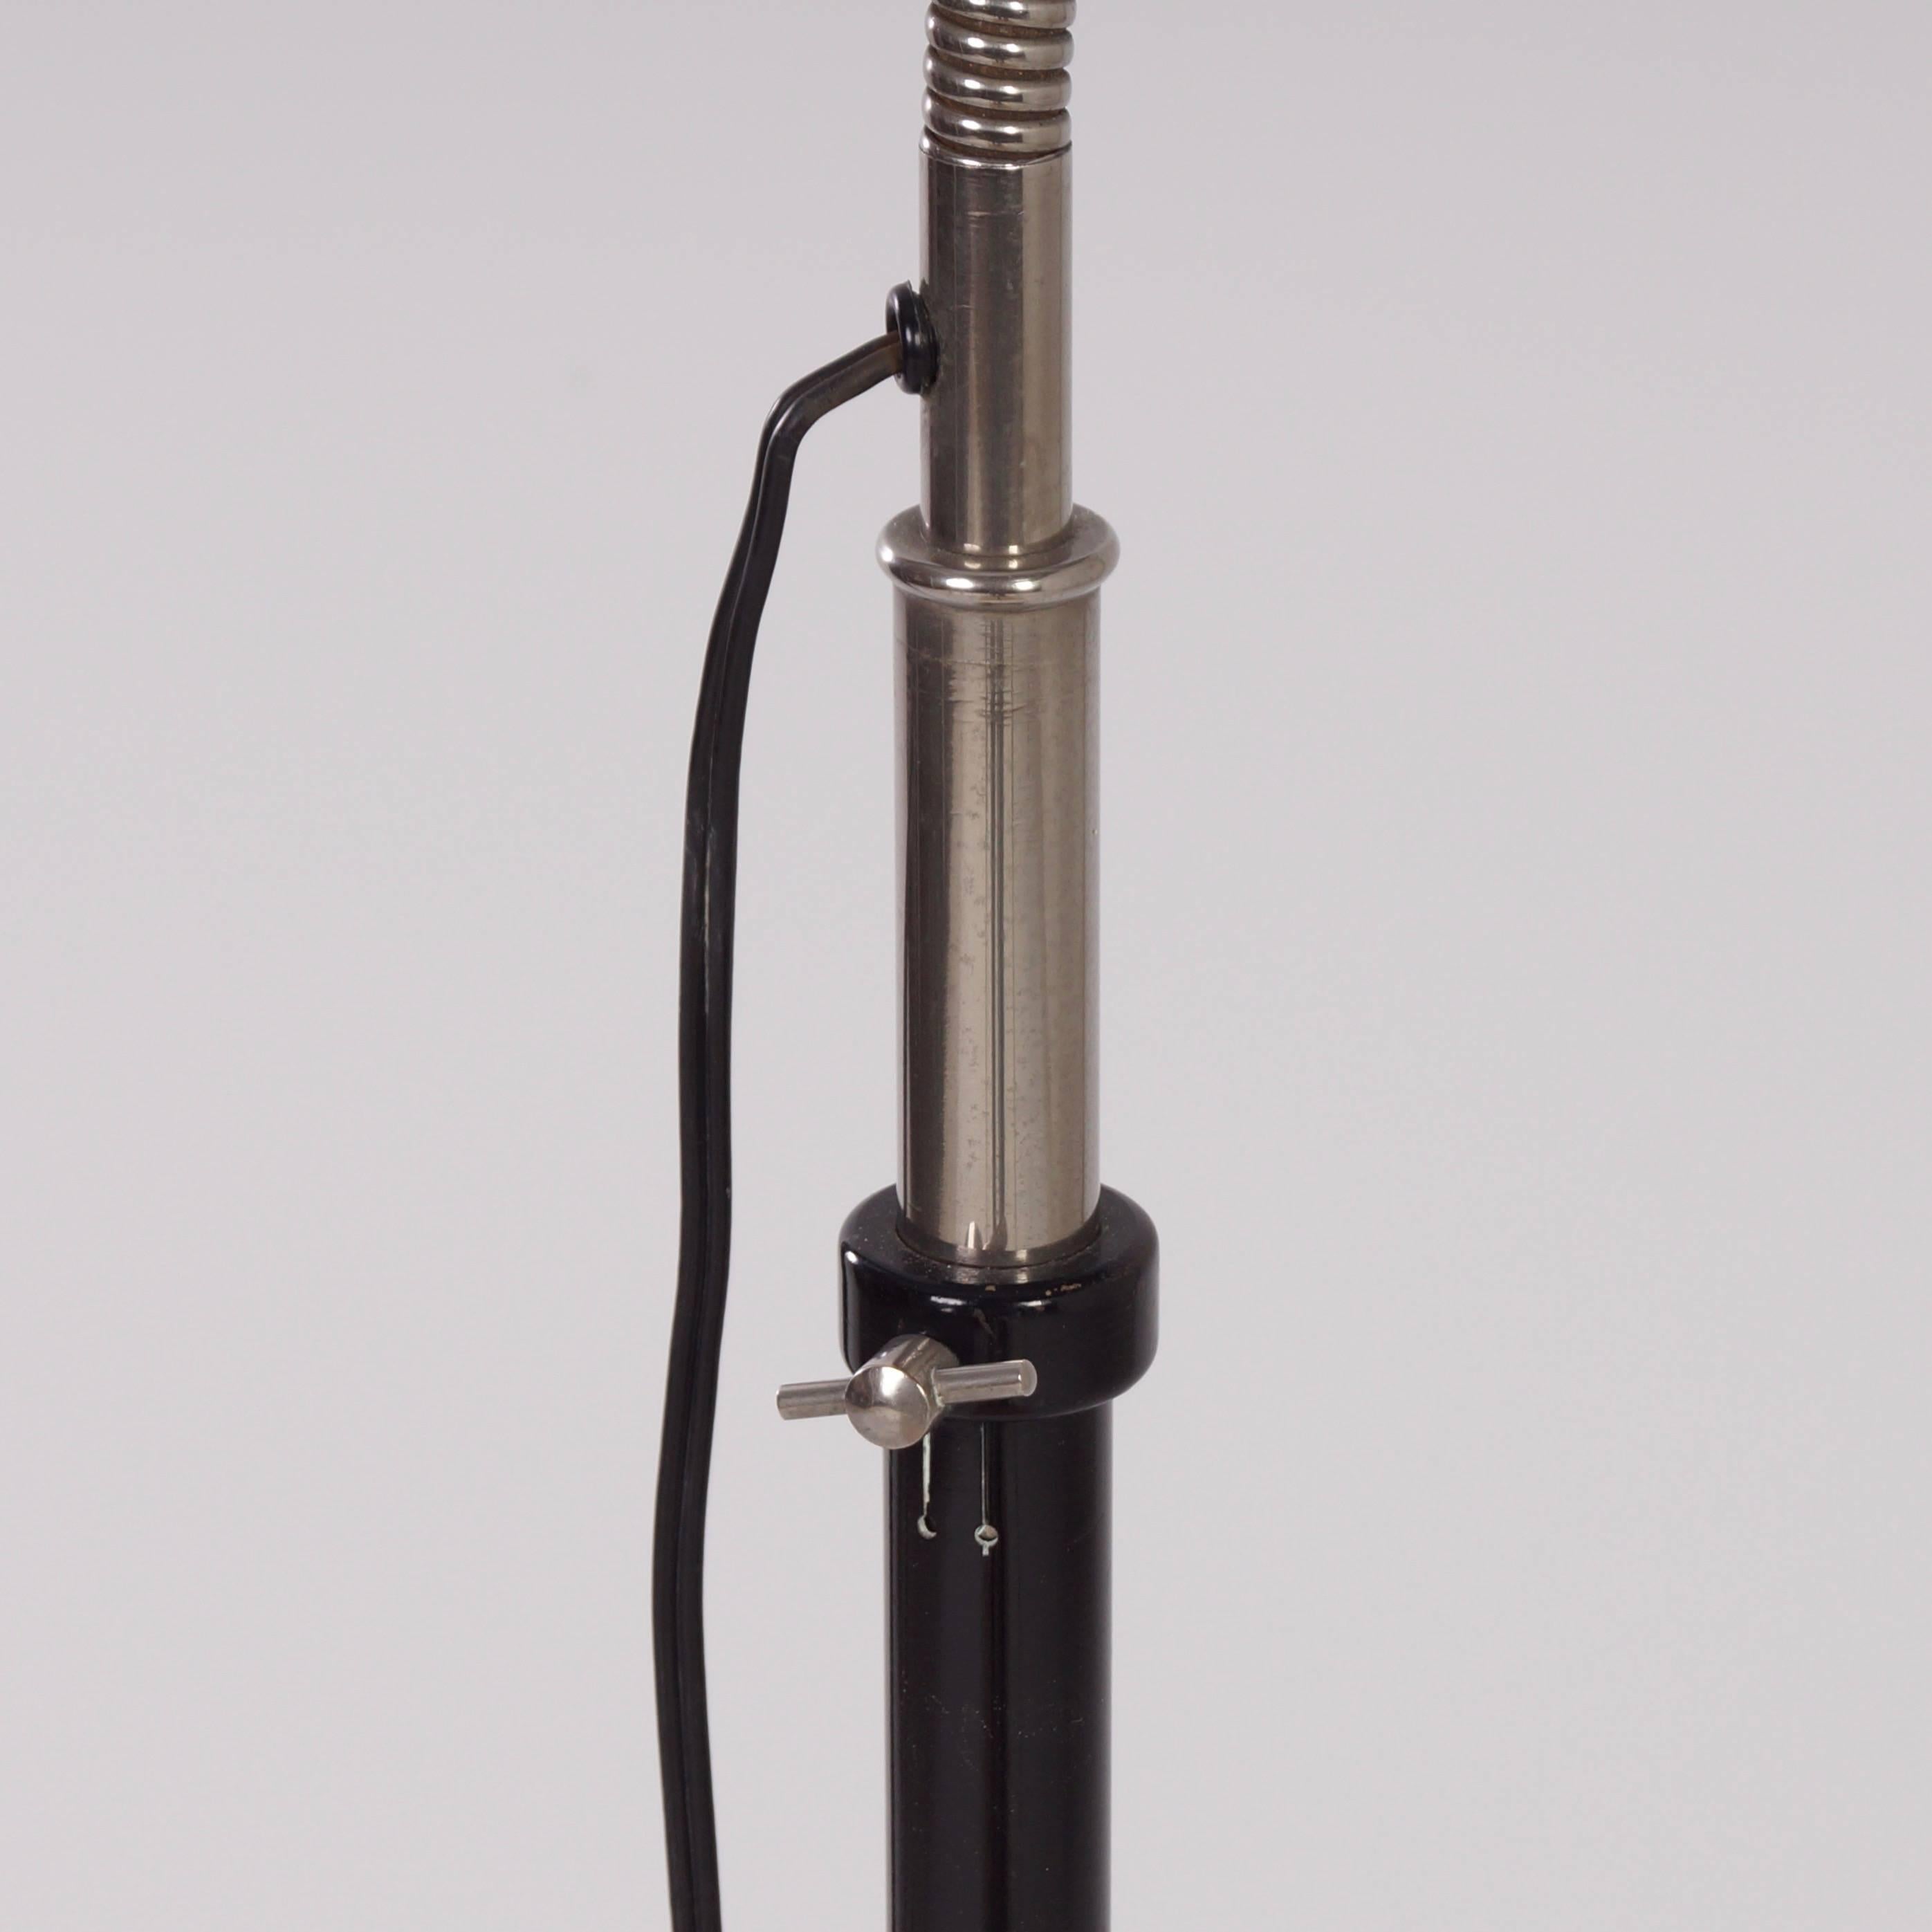 Mid-20th Century Industrial Hala Floor Lamp by H. Busquet, circa 1950 For Sale